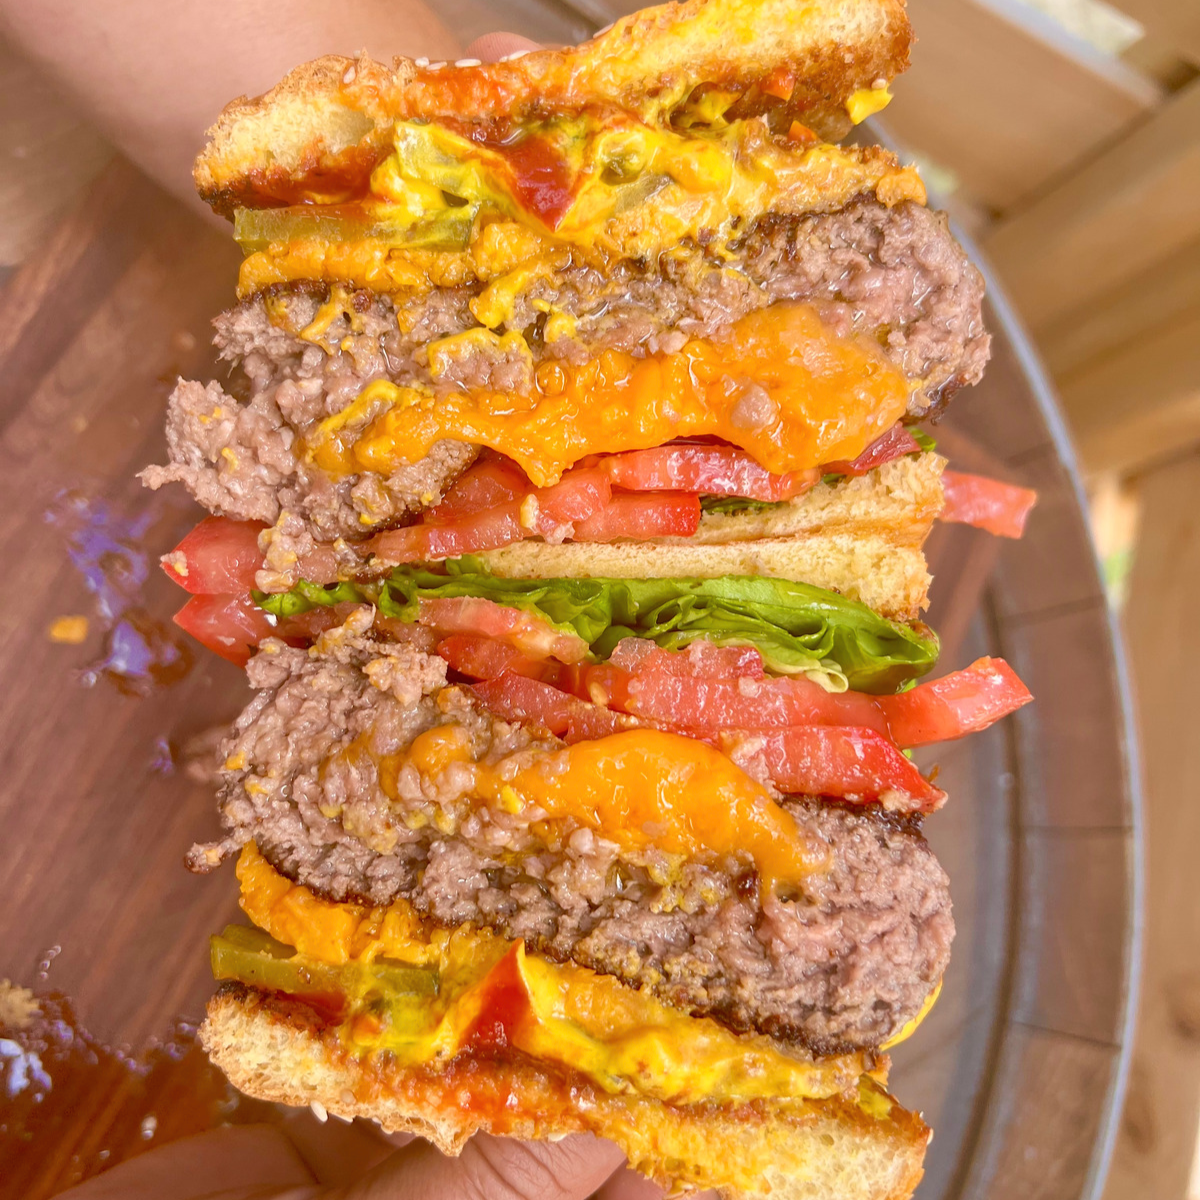 The Alchemy Juicy Lucy Cheeseburger